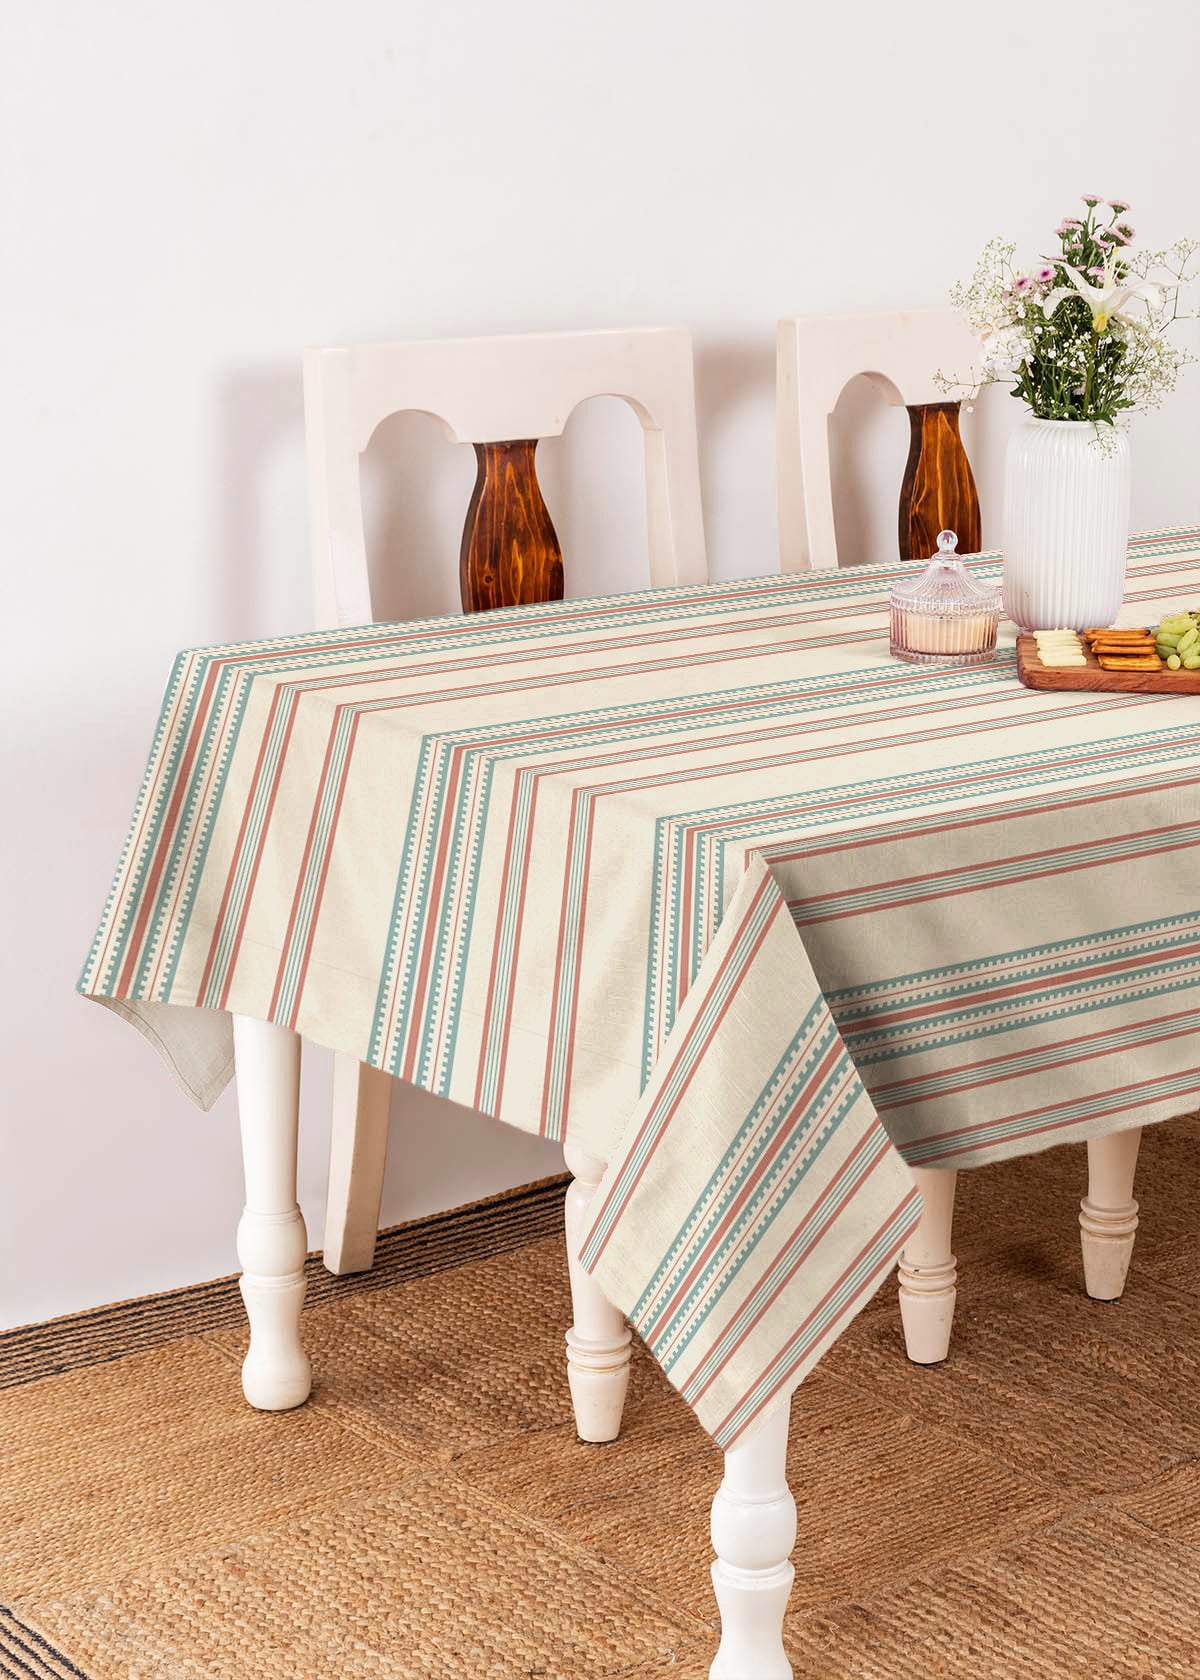 Roman stripes 100% cotton customisable geometric table cloth for dining - Rust and Nile blue